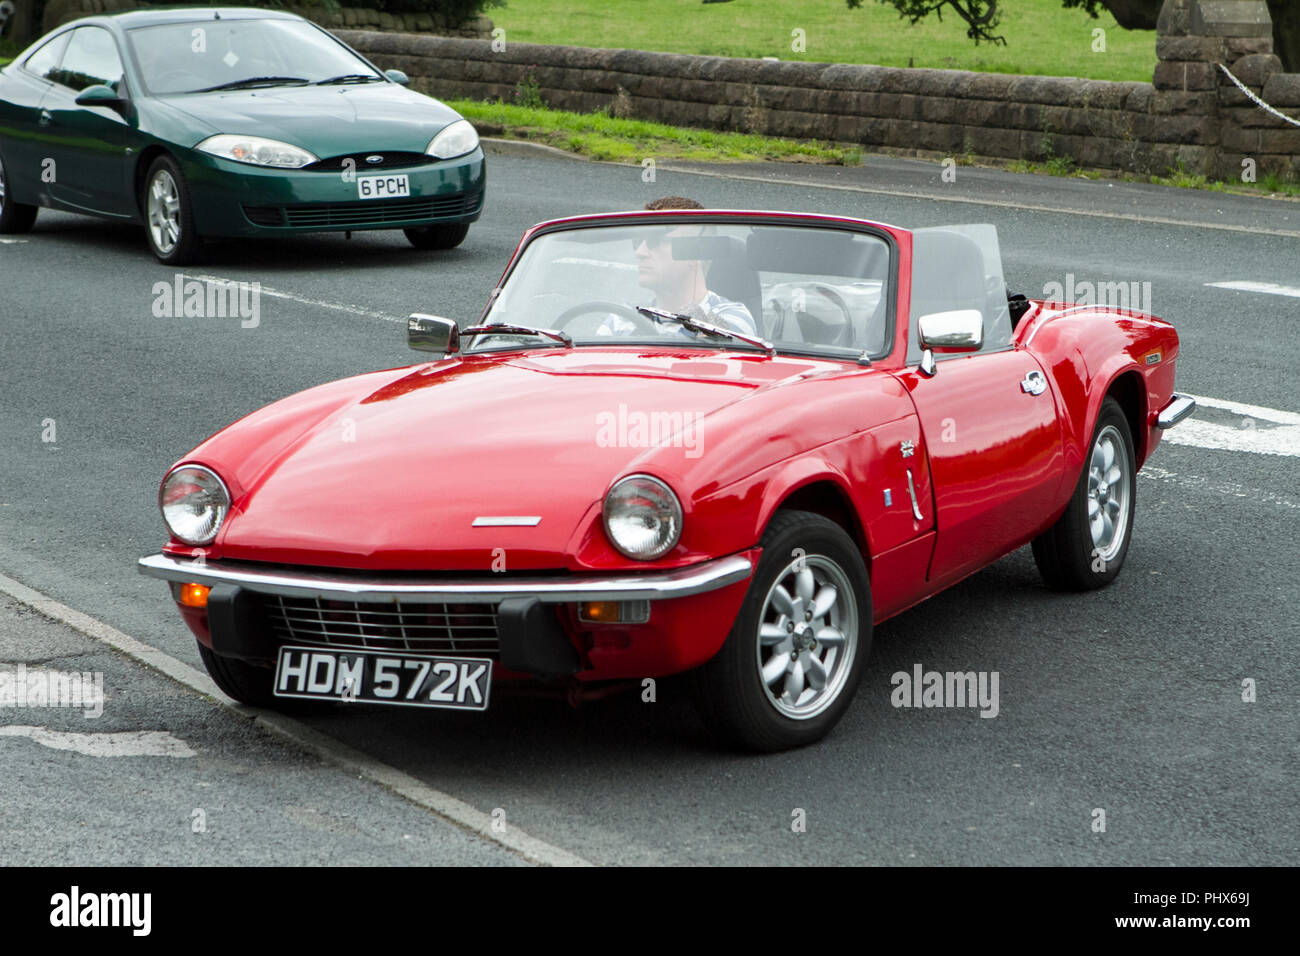 Red Triumph Spitfire at Hoghton towers annual classic vintage car rally, UK Stock Photo